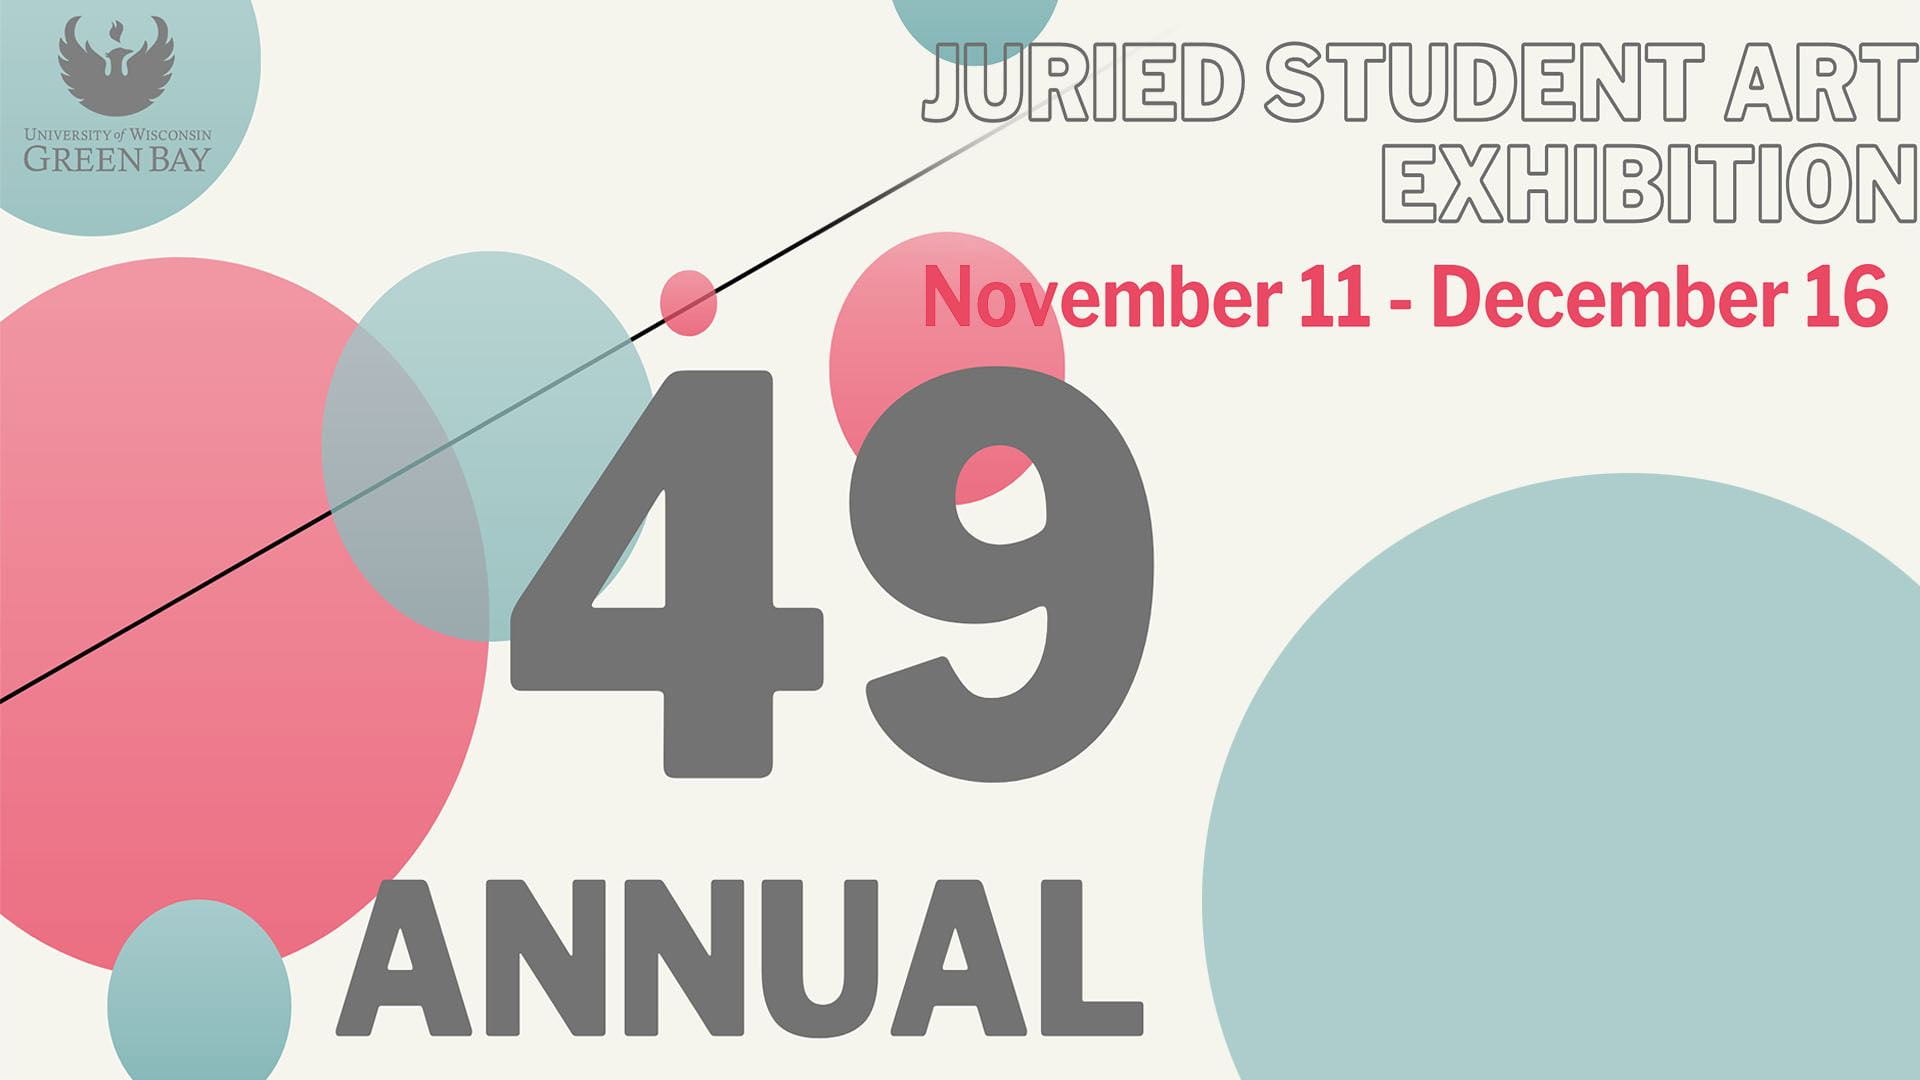 49th Annual Juried Student Art Exhibition